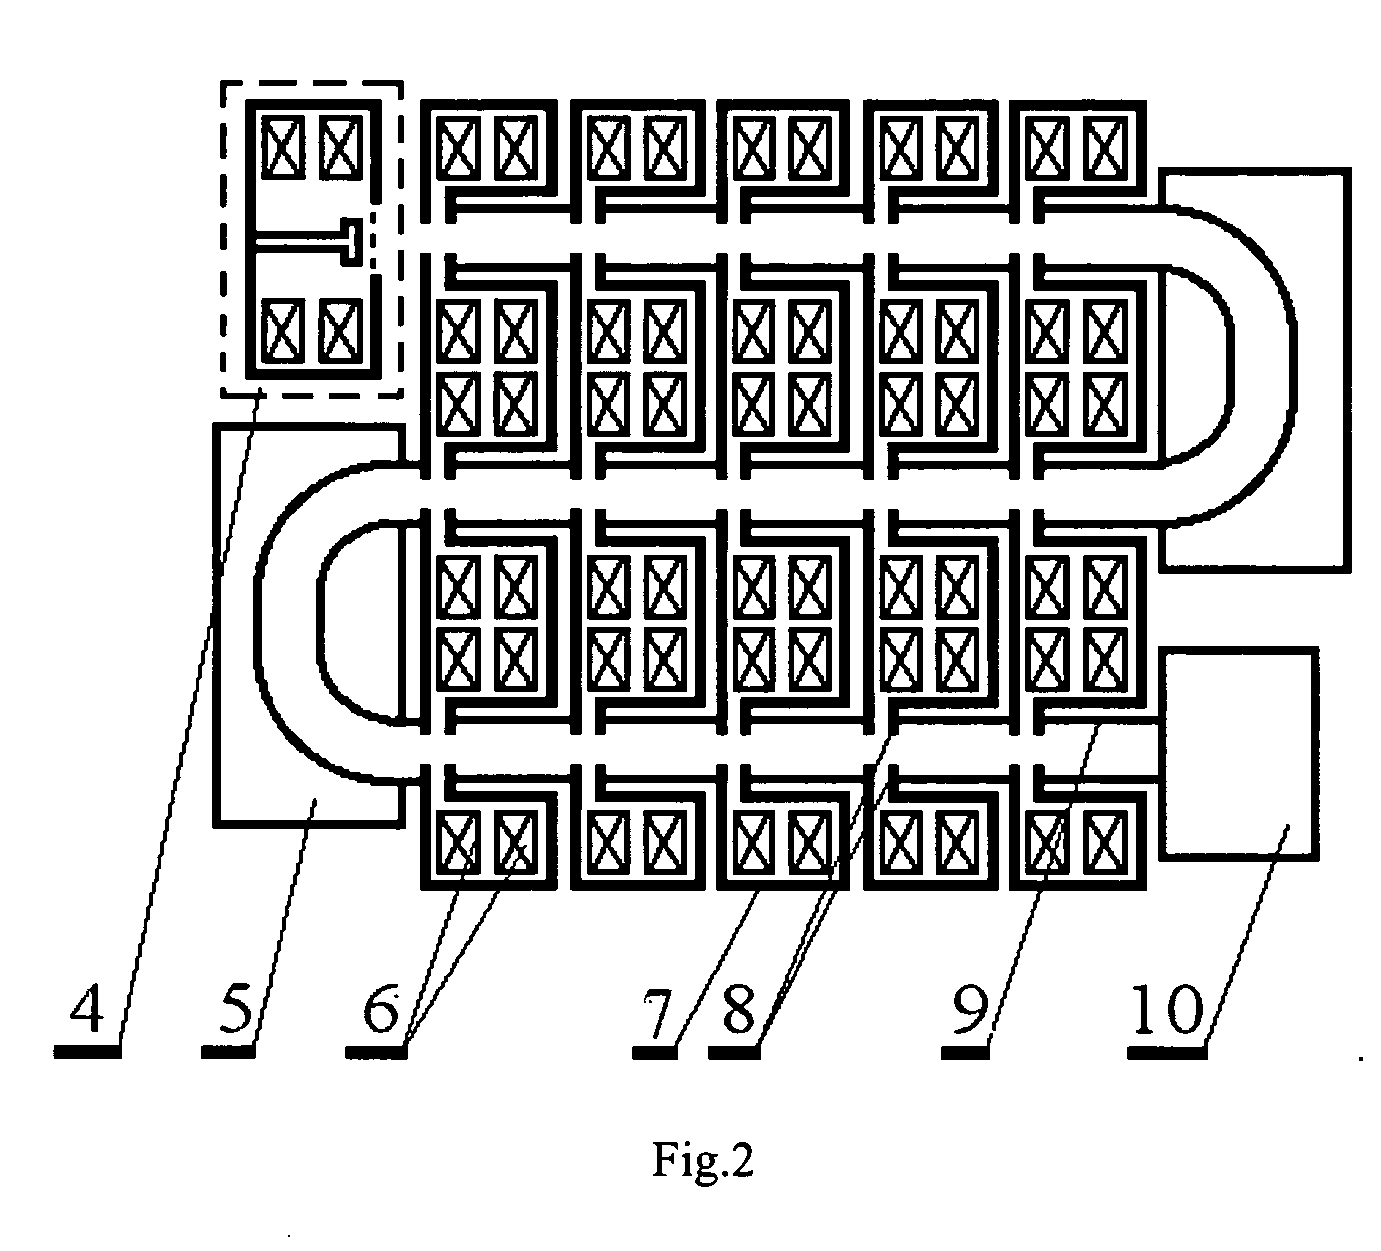 Multi-channel induction accelerator